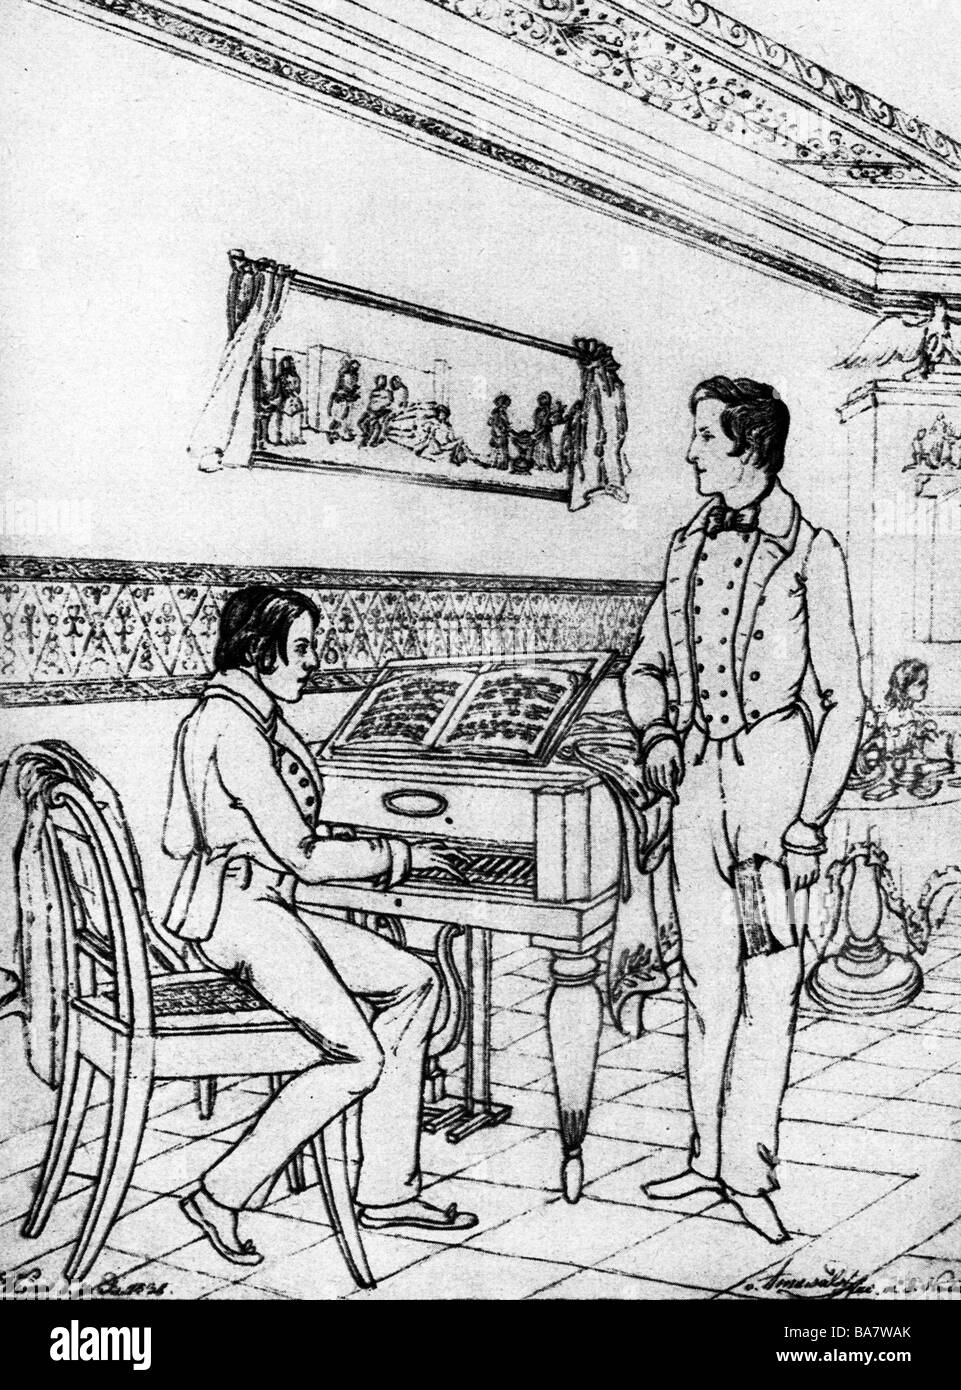 Goethe, Walther Wolfgang von, 9.4.1818 - 15.4.1885, German composer, with brother Wolfgang Maximilian (standing) in the Juno Room, Goethe House, Waimar, drawing by Bernhard von Arnswald, 1838, , Stock Photo